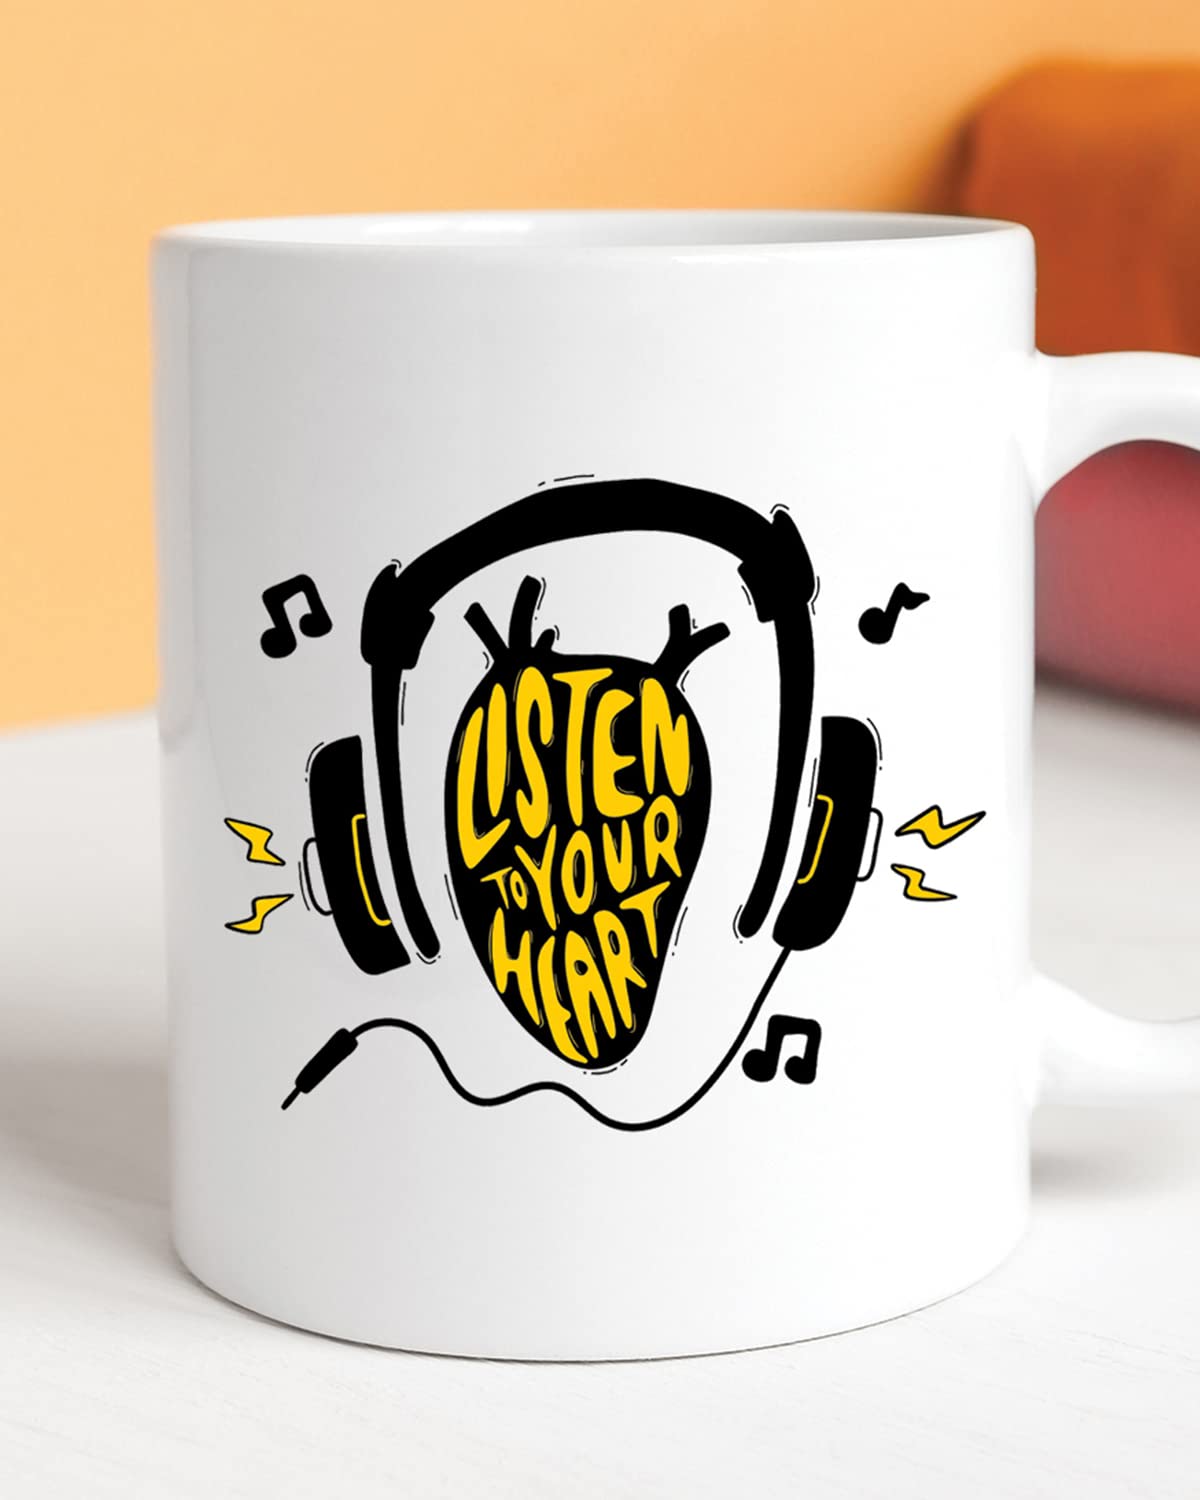 LISTEN TO YOUR HEART Coffee Mug - Music Inspired Printed Mug, Gift for Friend, Birthday Gift, Birthday Mug, Motivational Mug, Printed with Funny & Funky Quotes, Valentines Day Mugs for Him & Her